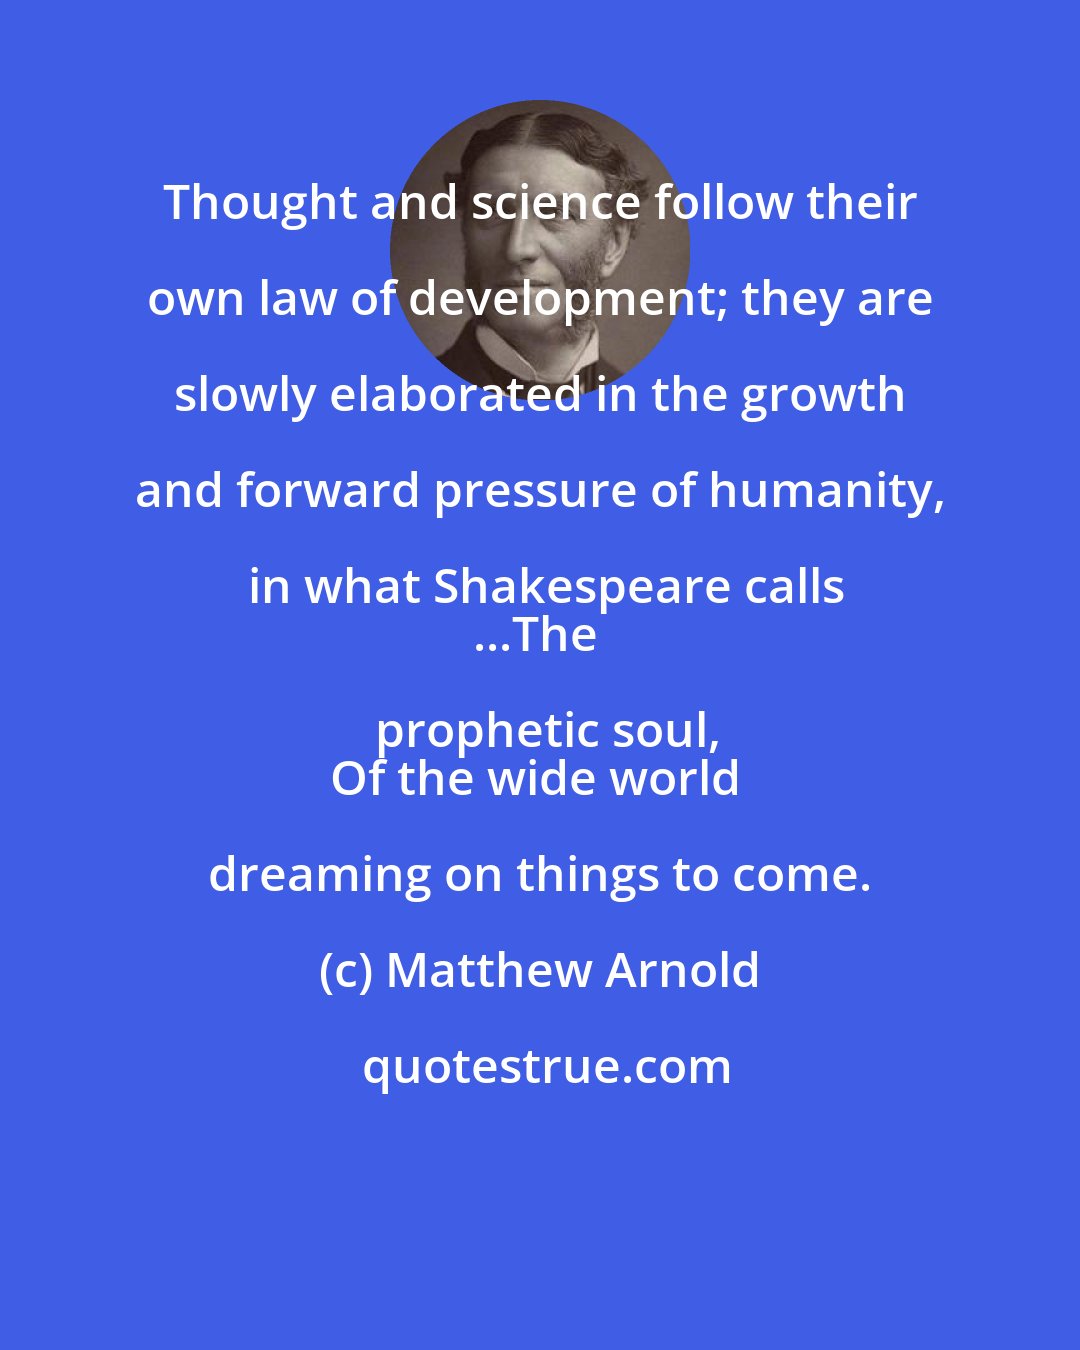 Matthew Arnold: Thought and science follow their own law of development; they are slowly elaborated in the growth and forward pressure of humanity, in what Shakespeare calls
...The prophetic soul,
Of the wide world dreaming on things to come.